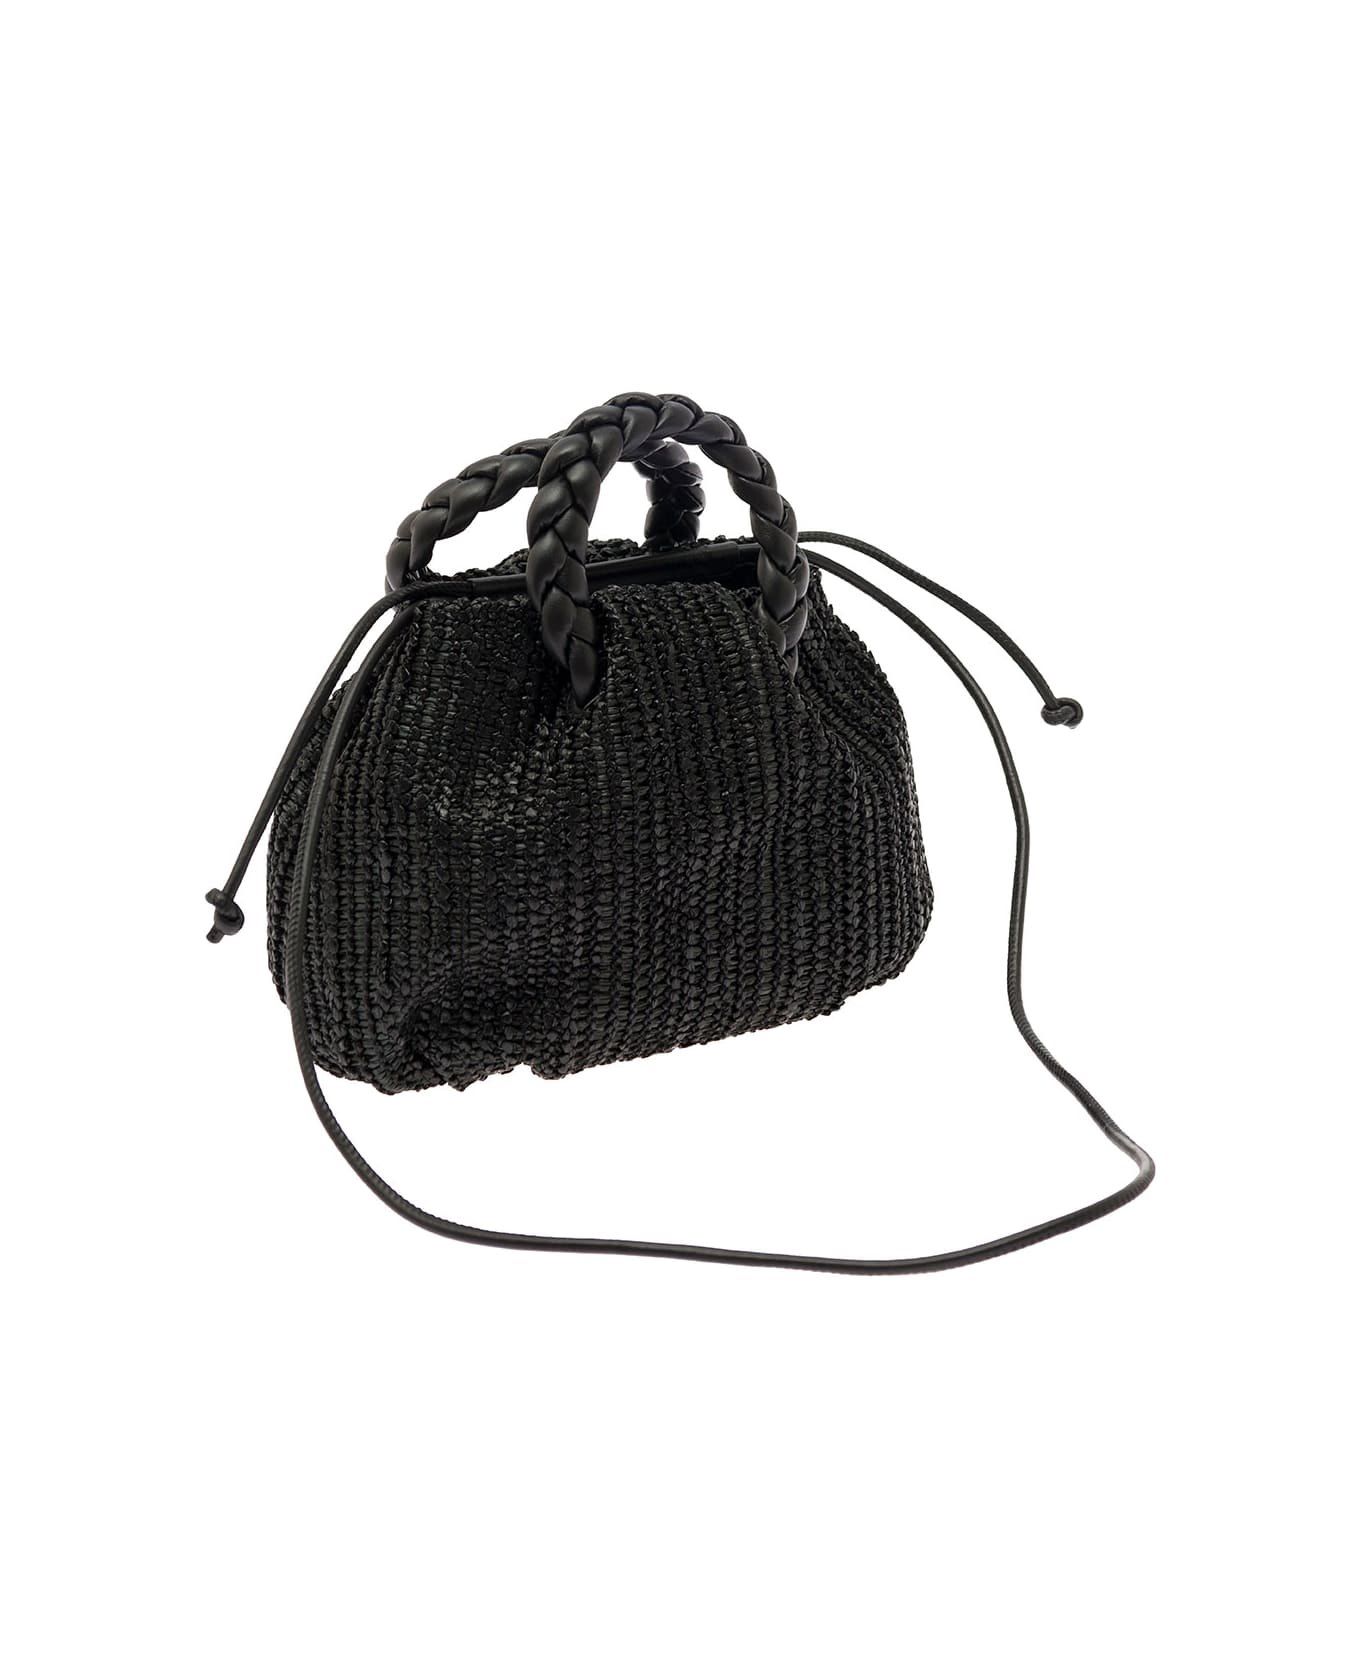 Hereu 'woven Bombon' Black Handbag With Braided Handles In Woven Leather Woman - Black